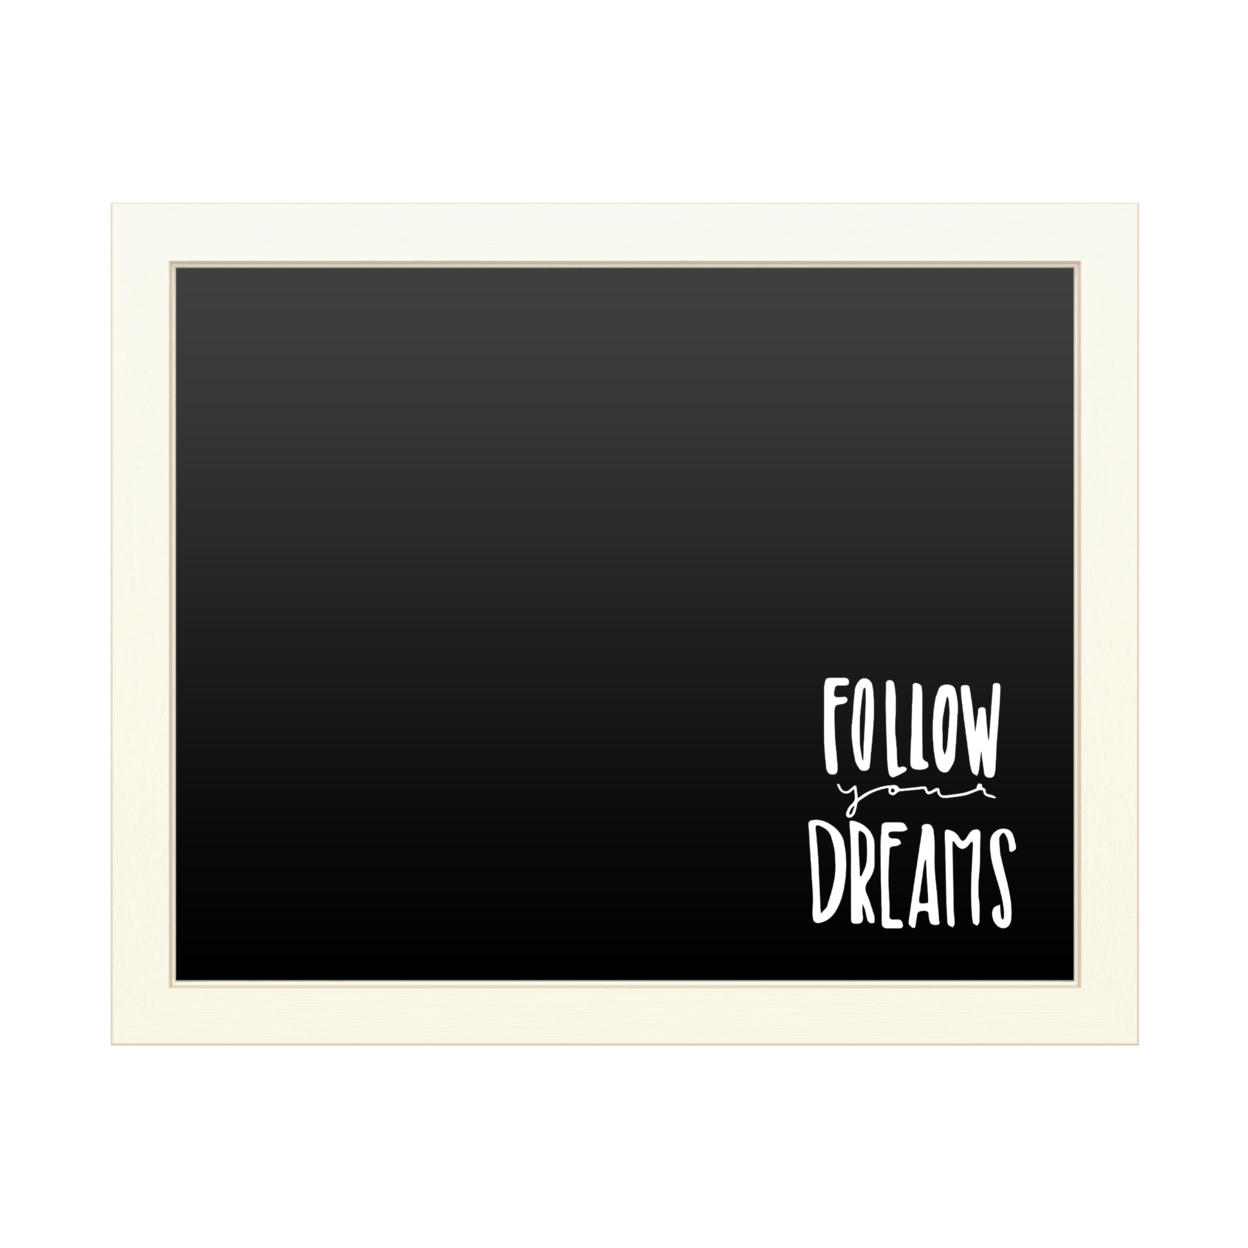 16 X 20 Chalk Board With Printed Artwork - Follow Your Dreams White Board - Ready To Hang Chalkboard